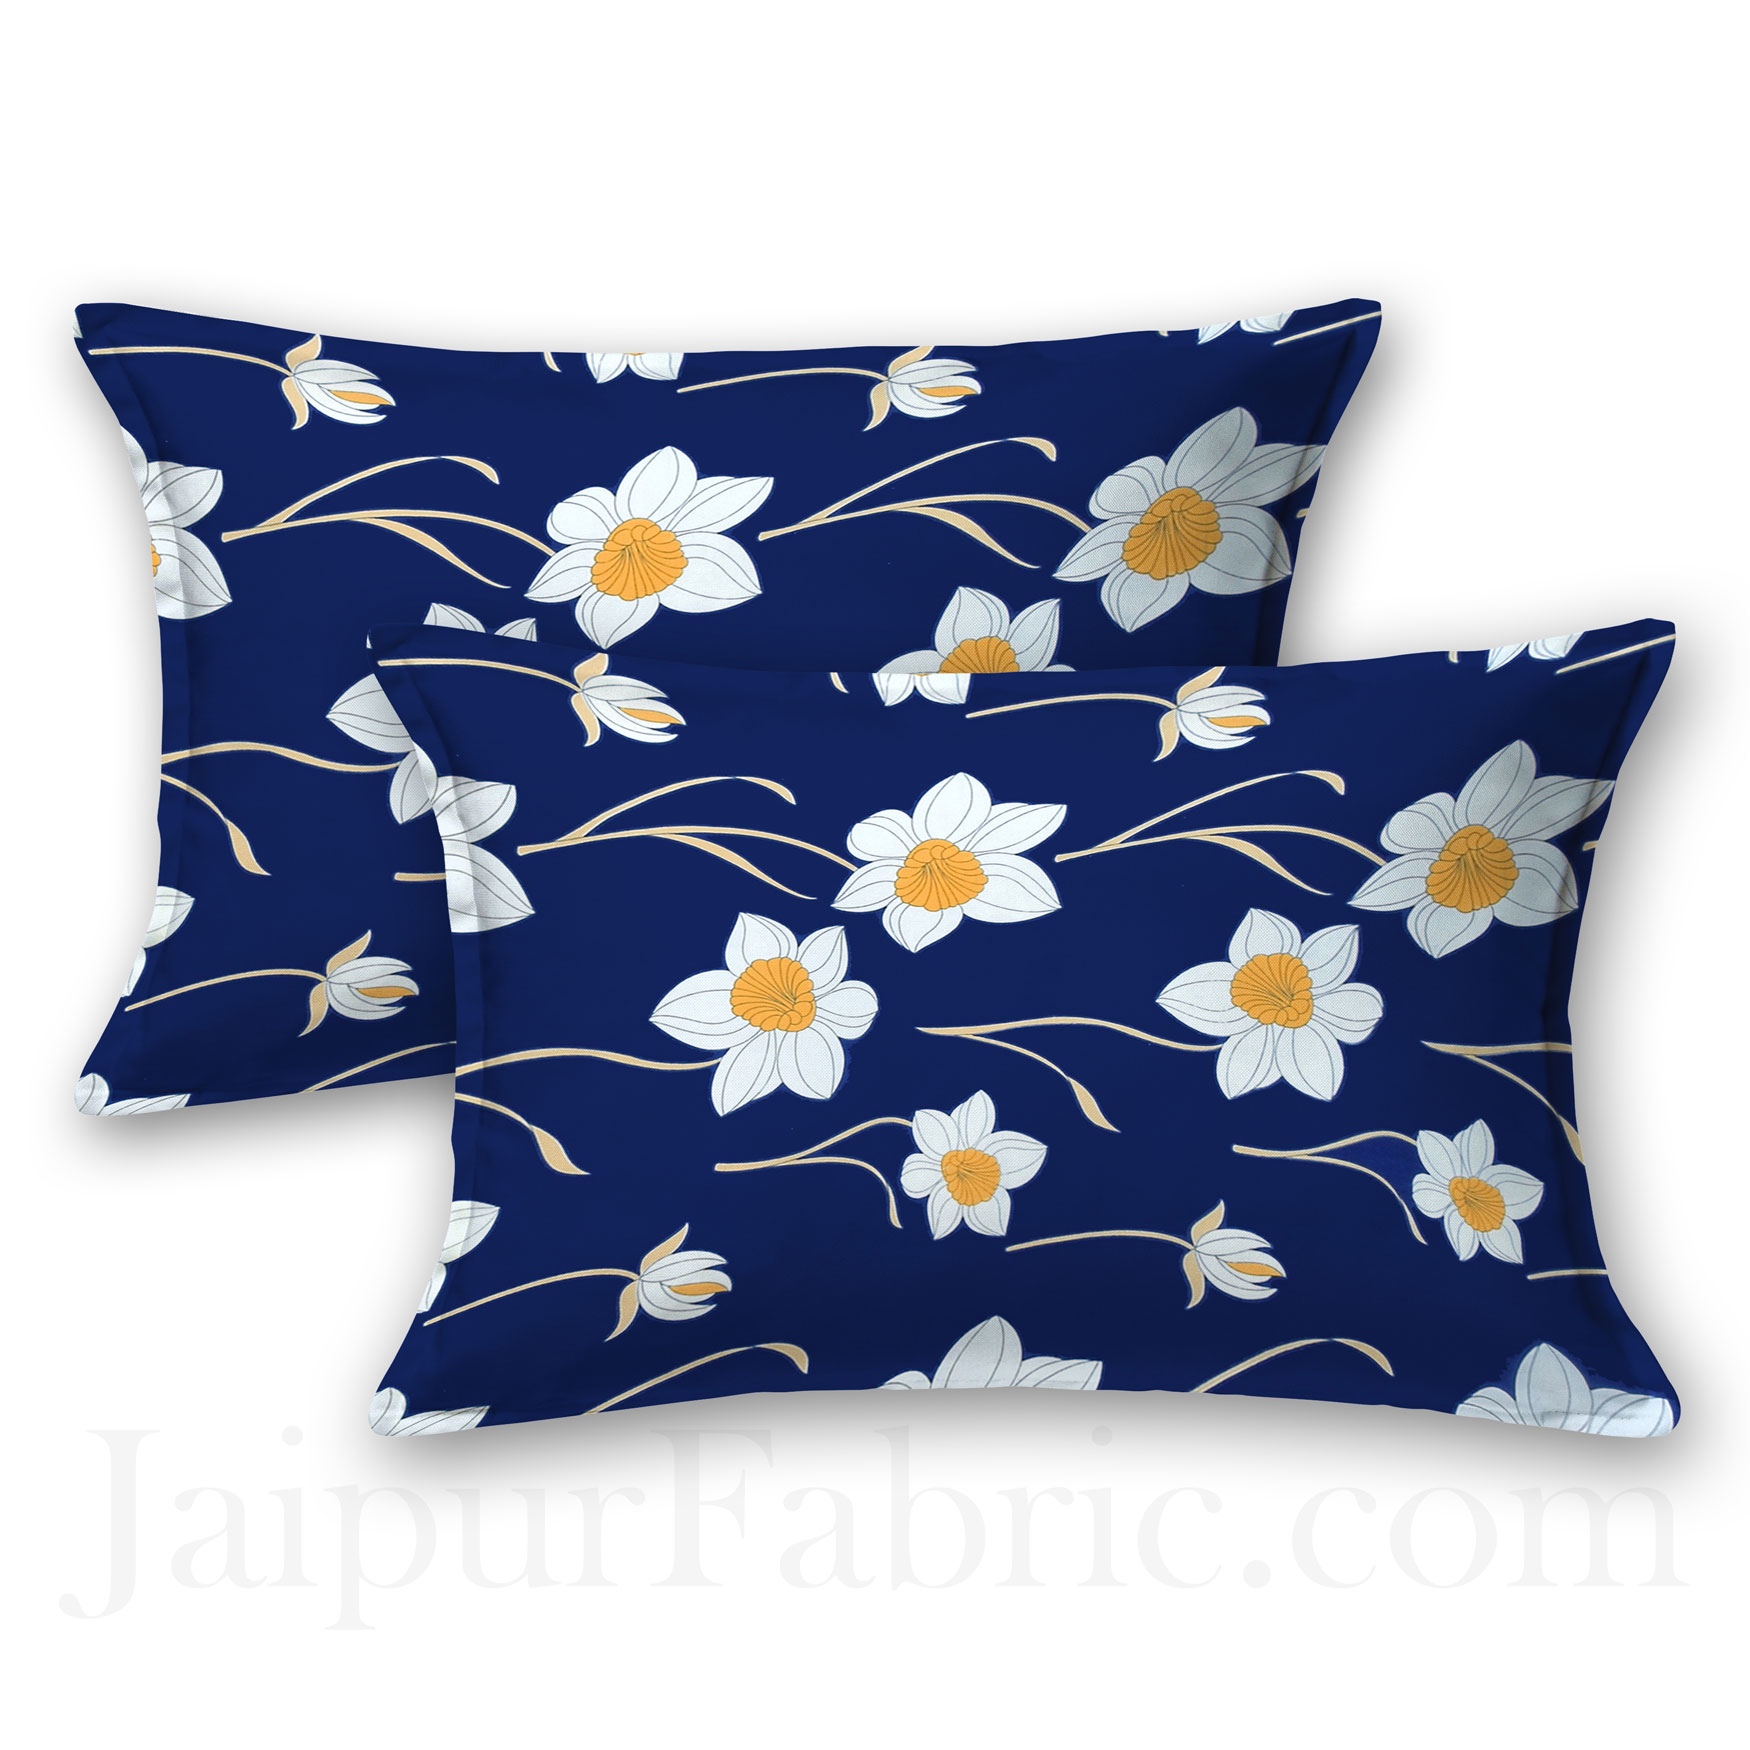 Common daisy Floral Navy Blue Poly Cotton Double Bedsheet